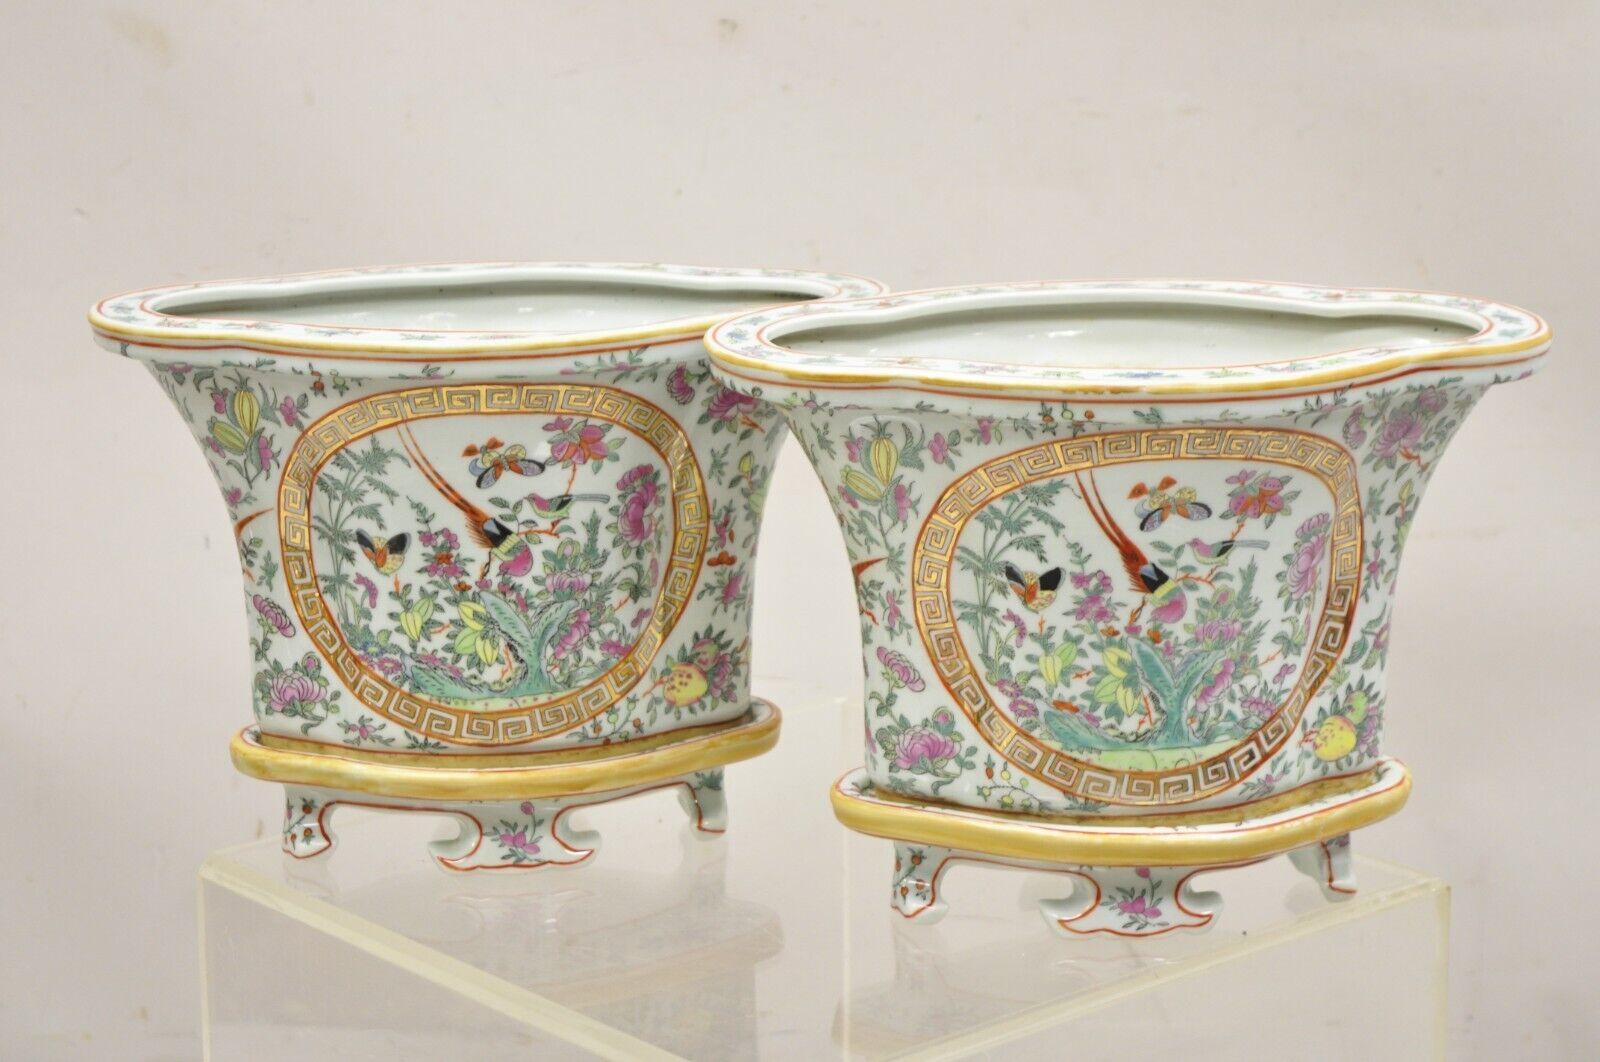 Vintage Chinese Export Porcelain Bird Painted Cachepot Flower Pot - a Pair. Item features a. Pots rest on porcelain decorated bases, unique shape, painted bird and floral design throughout, very nice vintage pair. Price is for the pair. Circa Mid